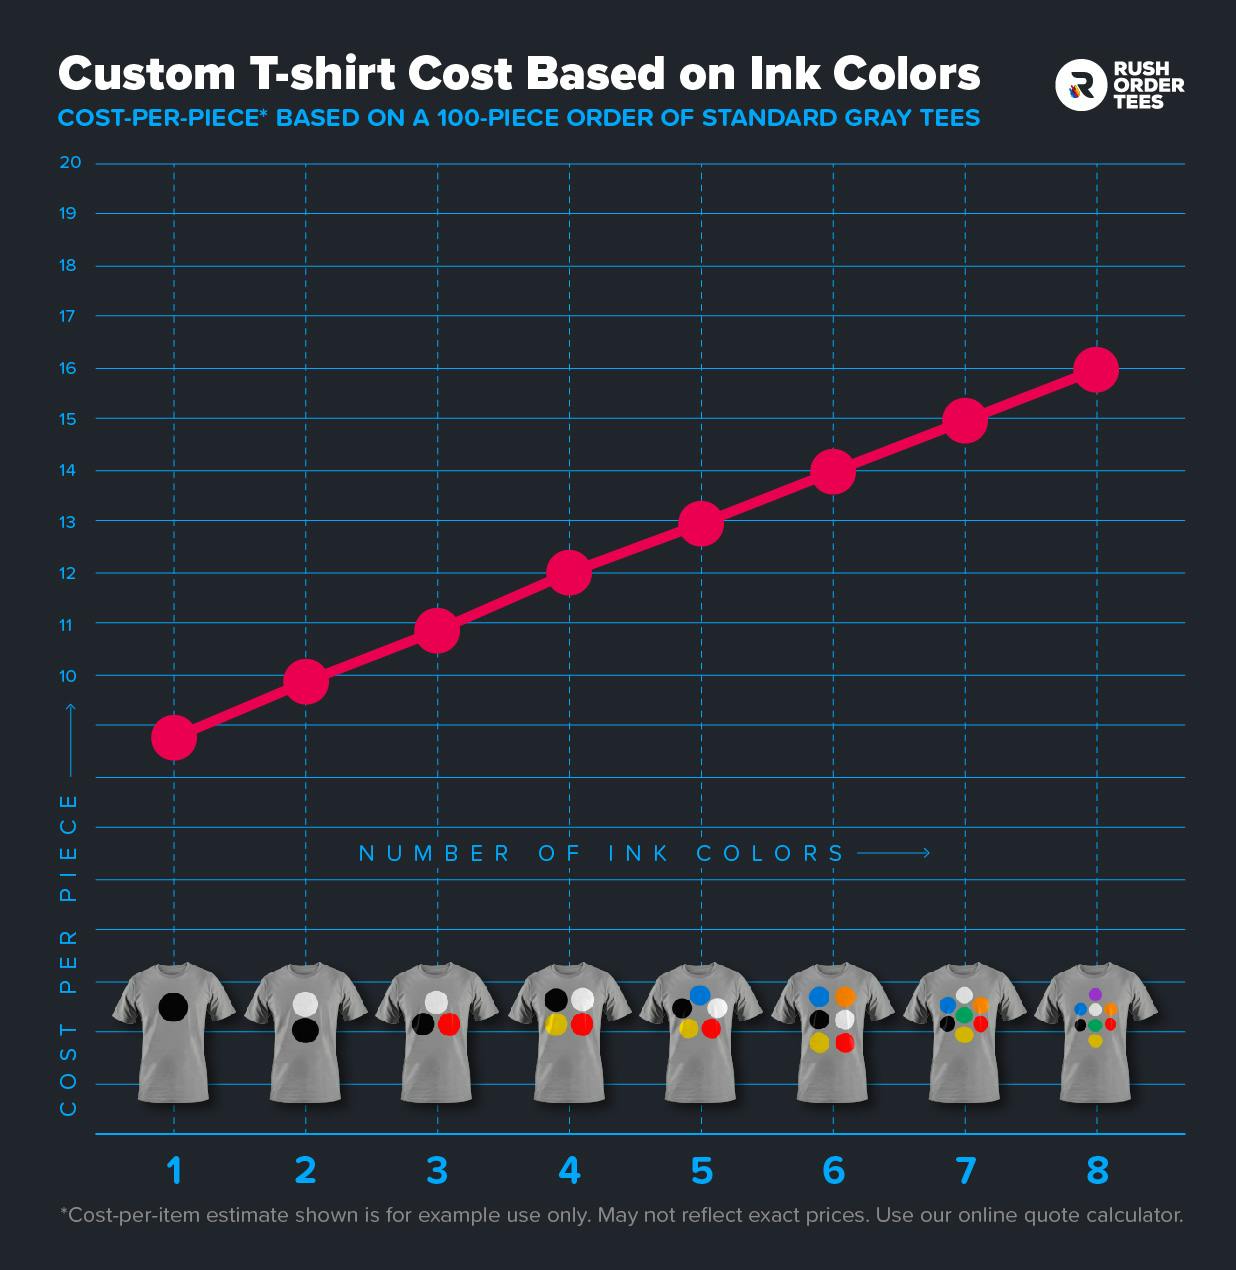 Custom screen printed t-shirt cost based on number of ink colors.